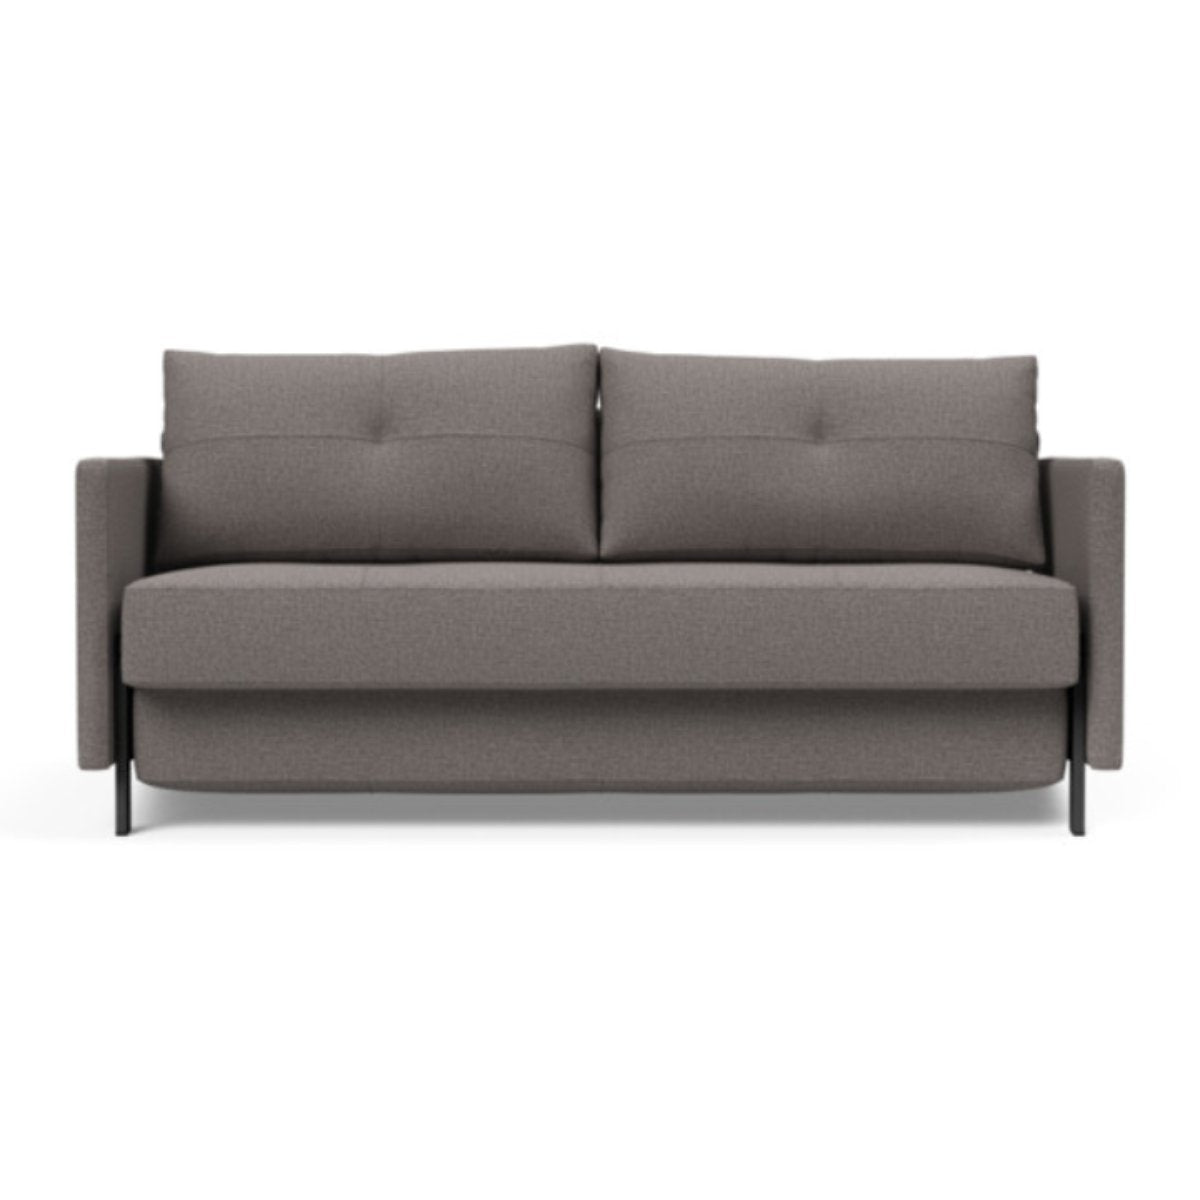 Cubed Queen Size Sofa Bed With Arms 521 Mixed Dance GreySofa Beds INNOVATION  521 Mixed Dance Grey   Four Hands, Burke Decor, Mid Century Modern Furniture, Old Bones Furniture Company, Old Bones Co, Modern Mid Century, Designer Furniture, https://www.oldbonesco.com/